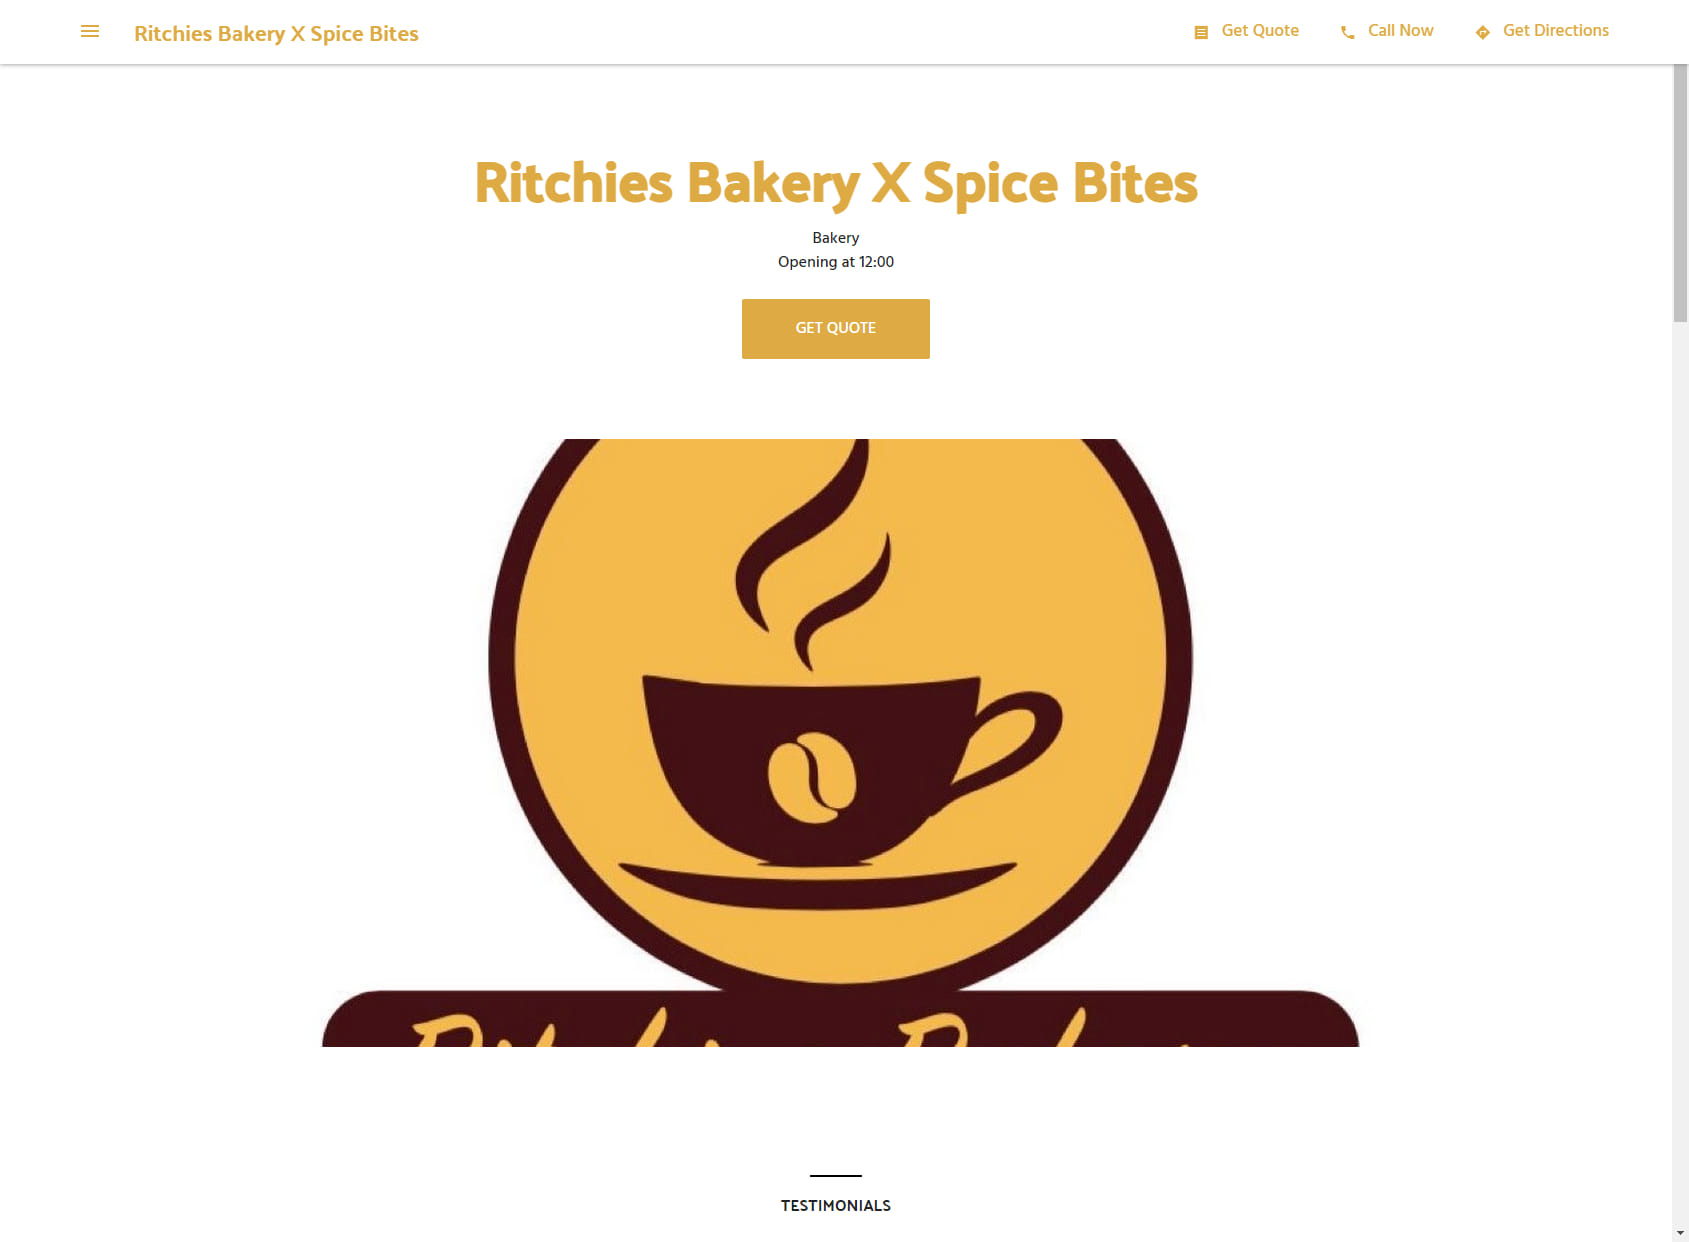 Ritchies Bakery X Spice Bites